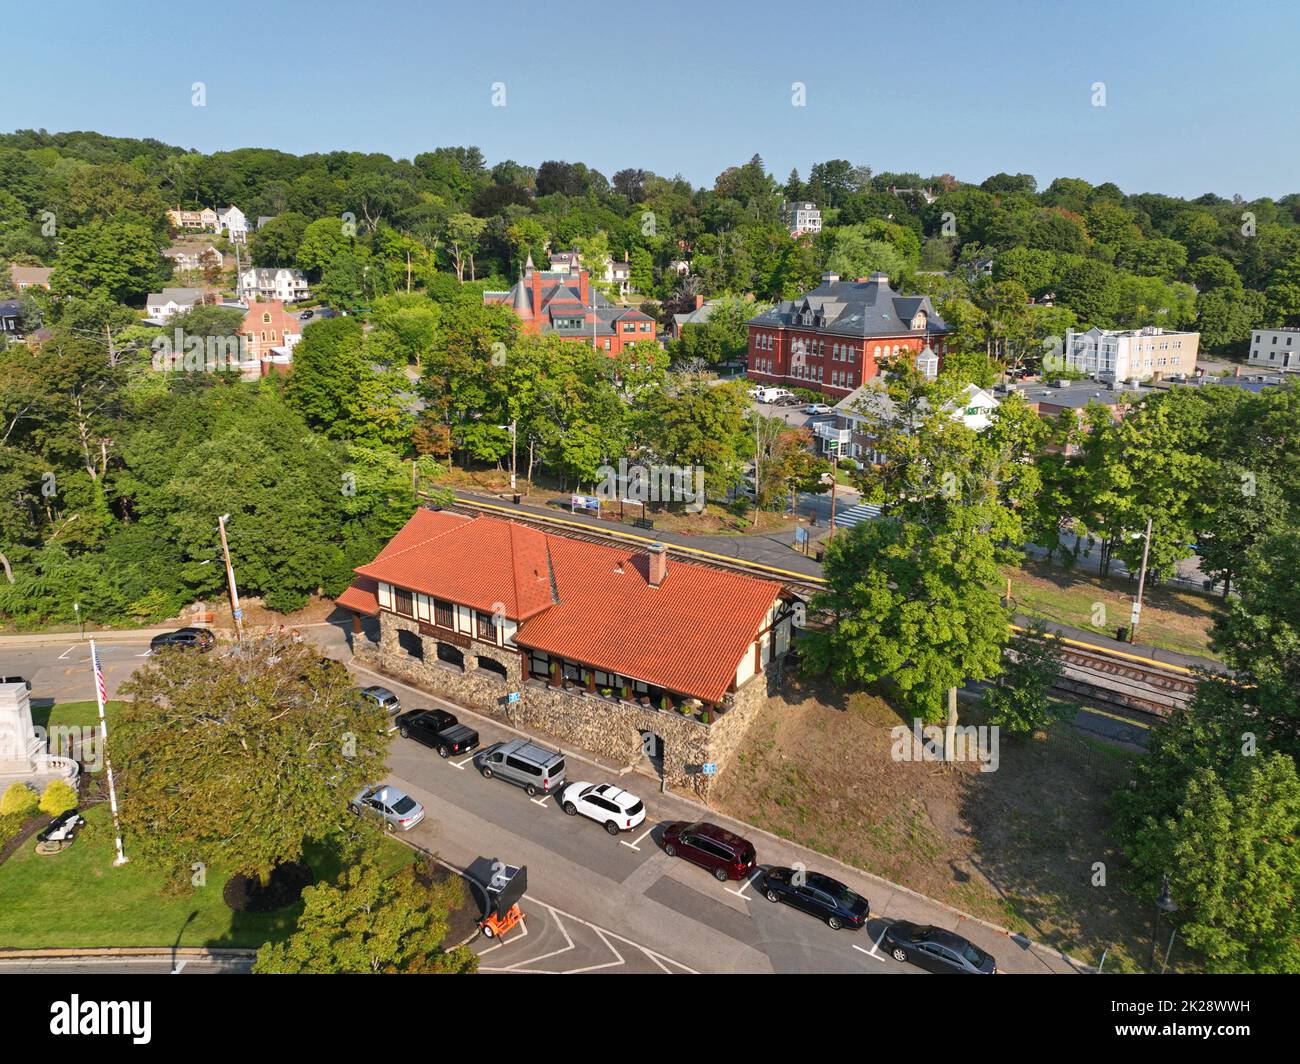 Belmont Train Station aerial view in historic town center of Belmont, Massachusetts MA, USA. Stock Photo